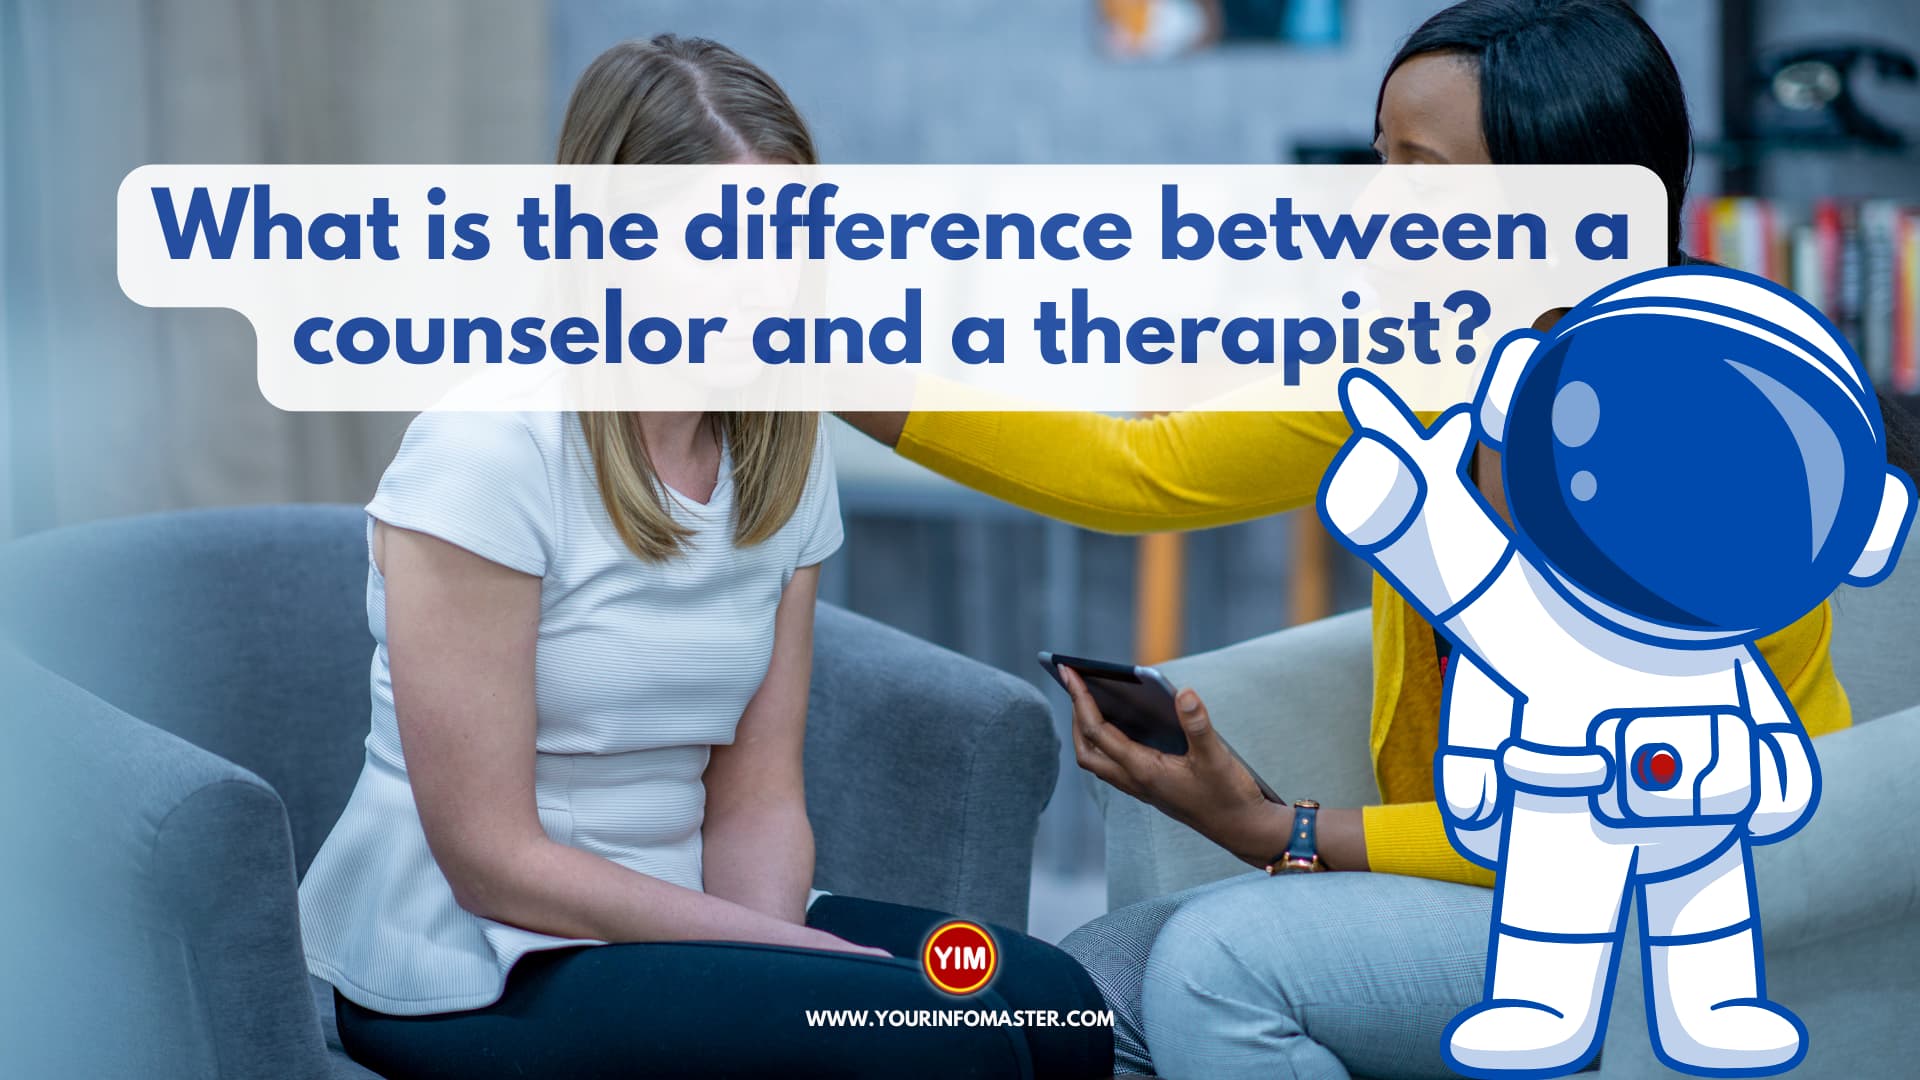 What is the difference between a counselor and a therapist